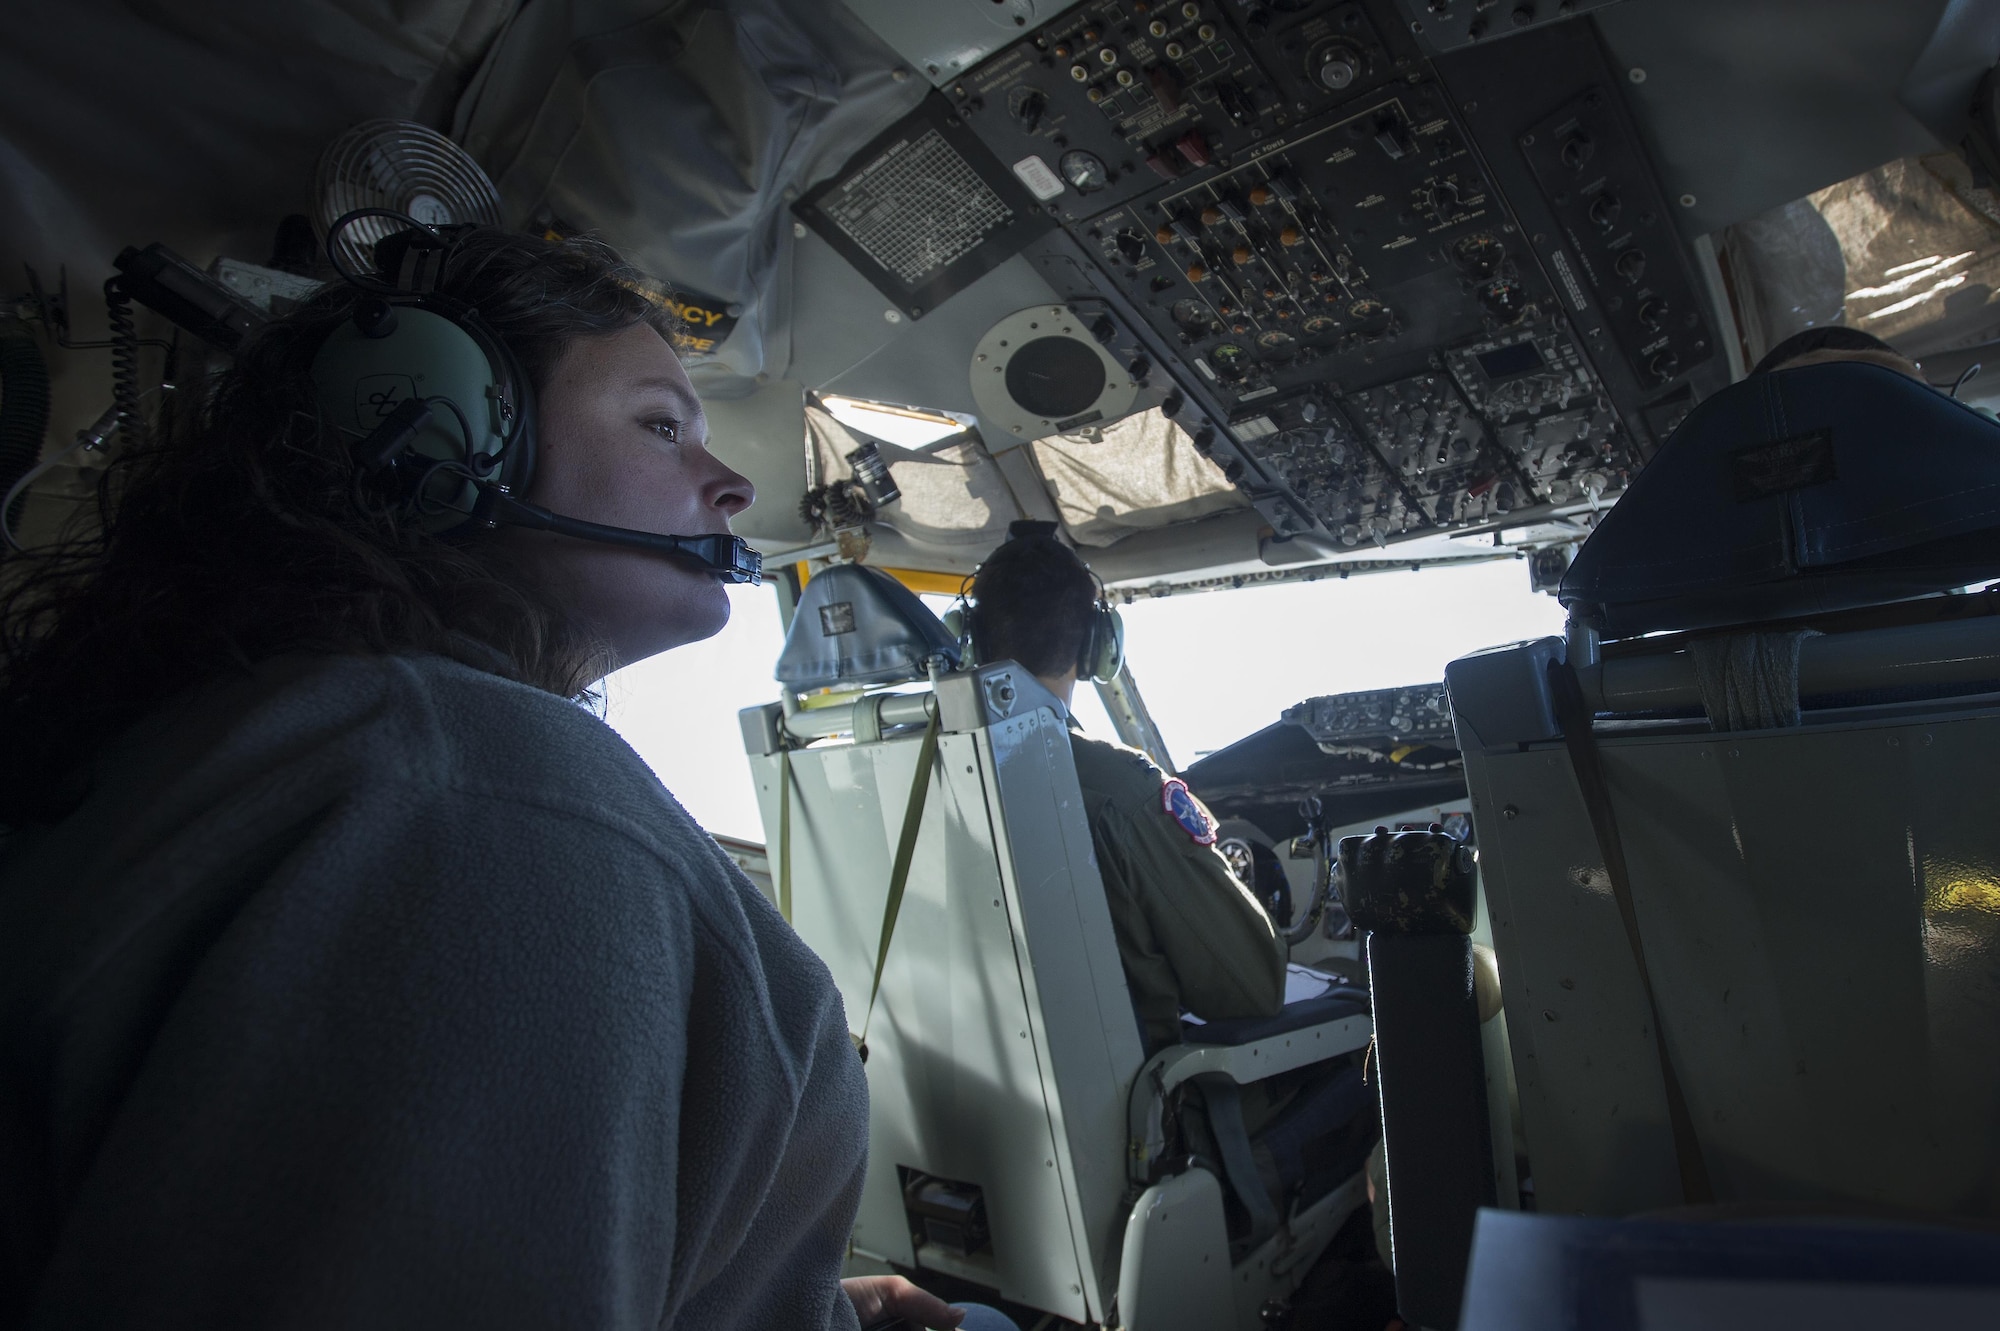 Emily Willhide, Team Shaw spouse, takes in the view from the cockpit of a KC-135 Stratotanker during a collaborative refueling training and spouse flight event at Shaw Air Force Base, S.C., Dec. 21, 2016. Airmen from the 93rd Air Refueling Squadron at Fairchild Air Force Base, Wash., brought the KC-135 to Shaw specifically for this training and utilized the ample space in both the cockpit and main cabin to take multiple Team Shaw spouses on a single spouse flight. (U.S. Air Force photo by Senior Airman Zade Vadnais)